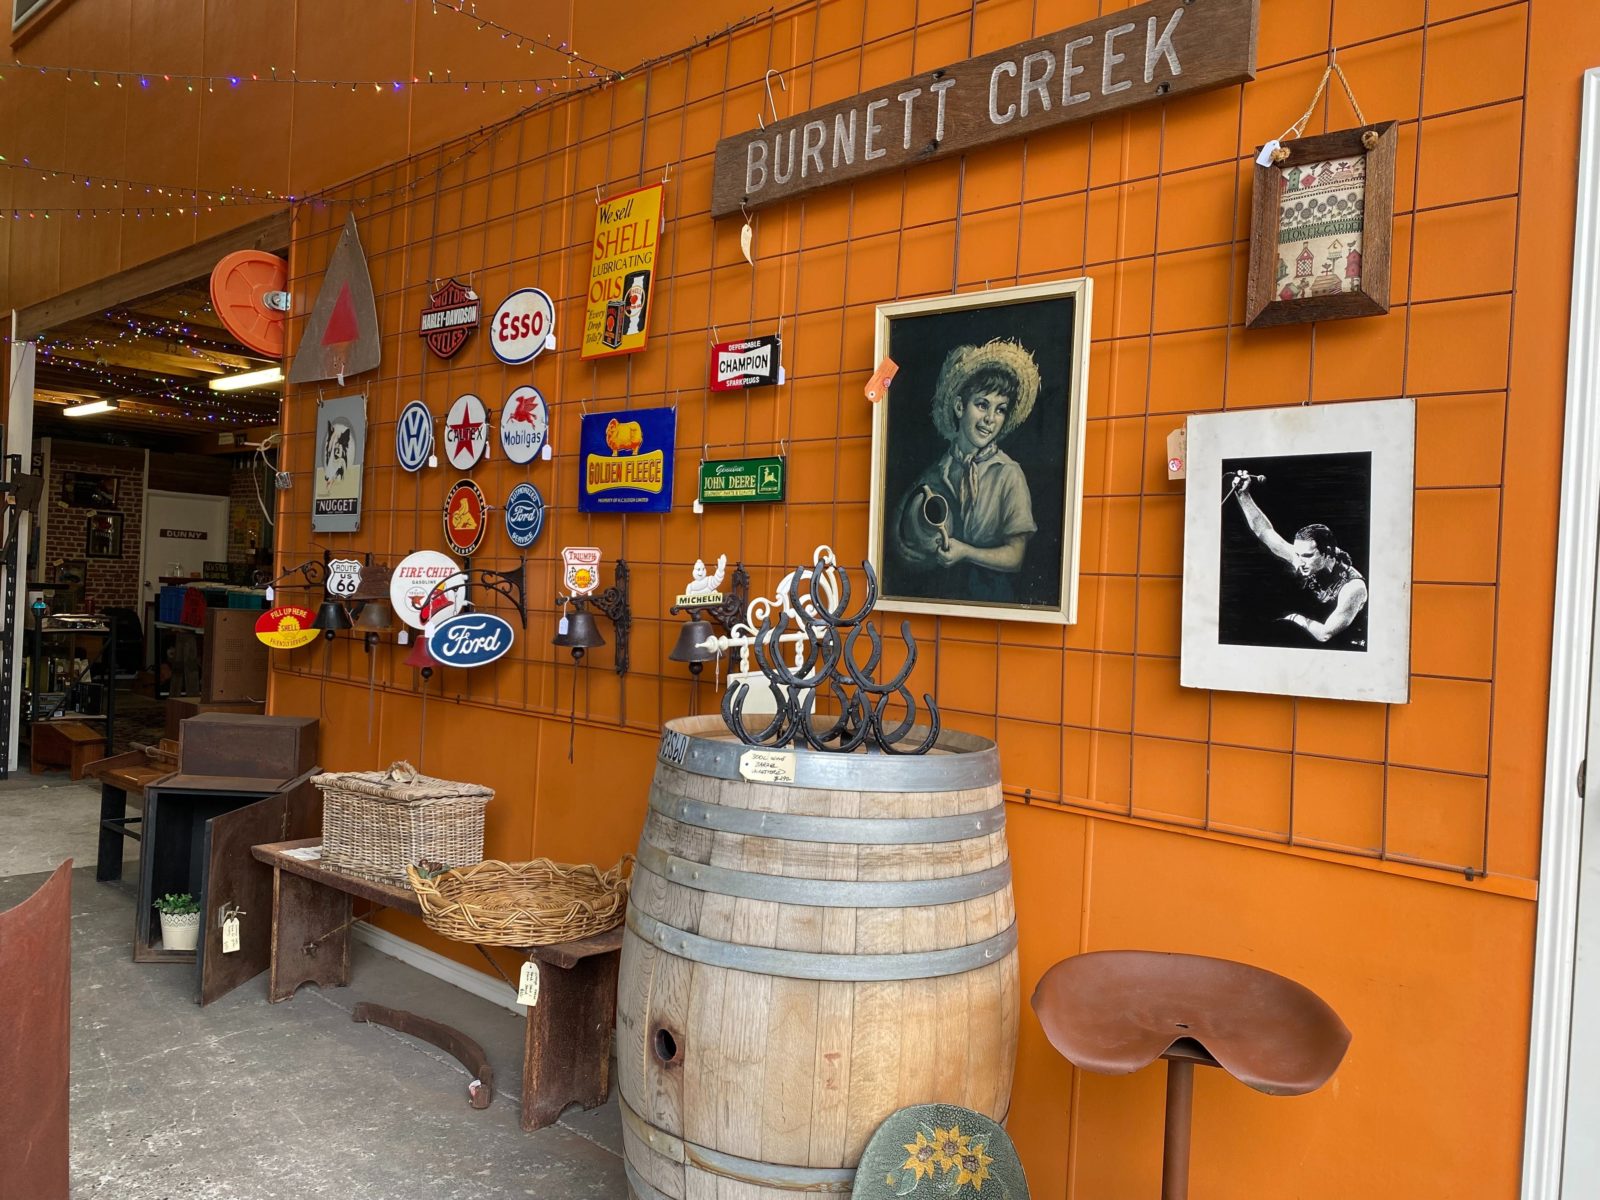 A wide photo of an orange painted wall with rustic items hanging on display